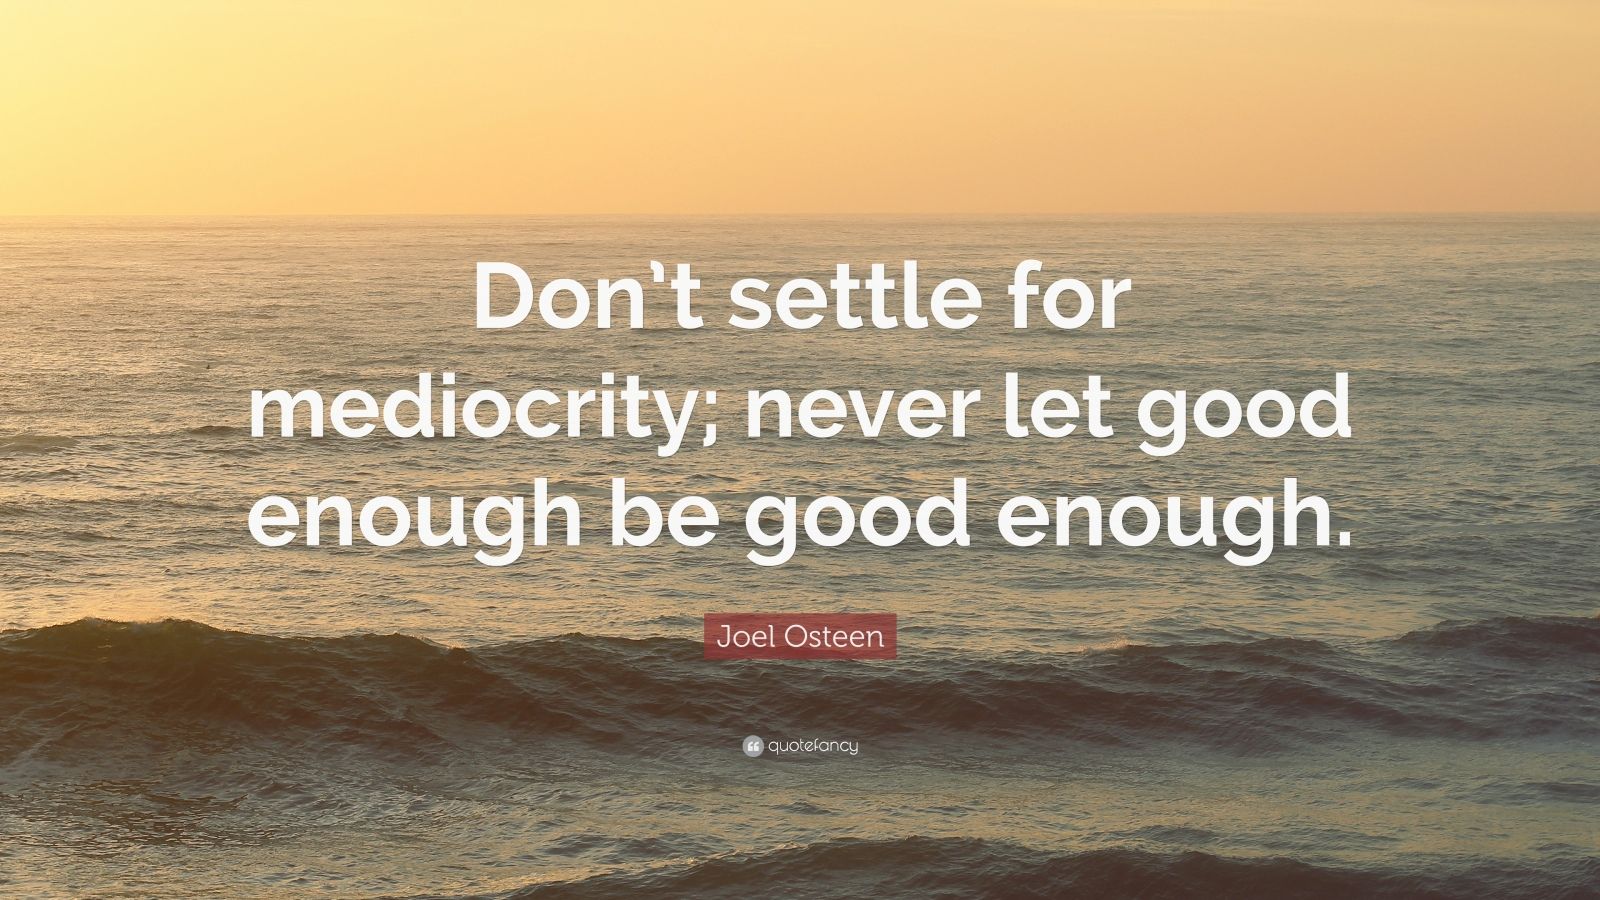 Joel Osteen Quote: “Don’t settle for mediocrity; never let good enough